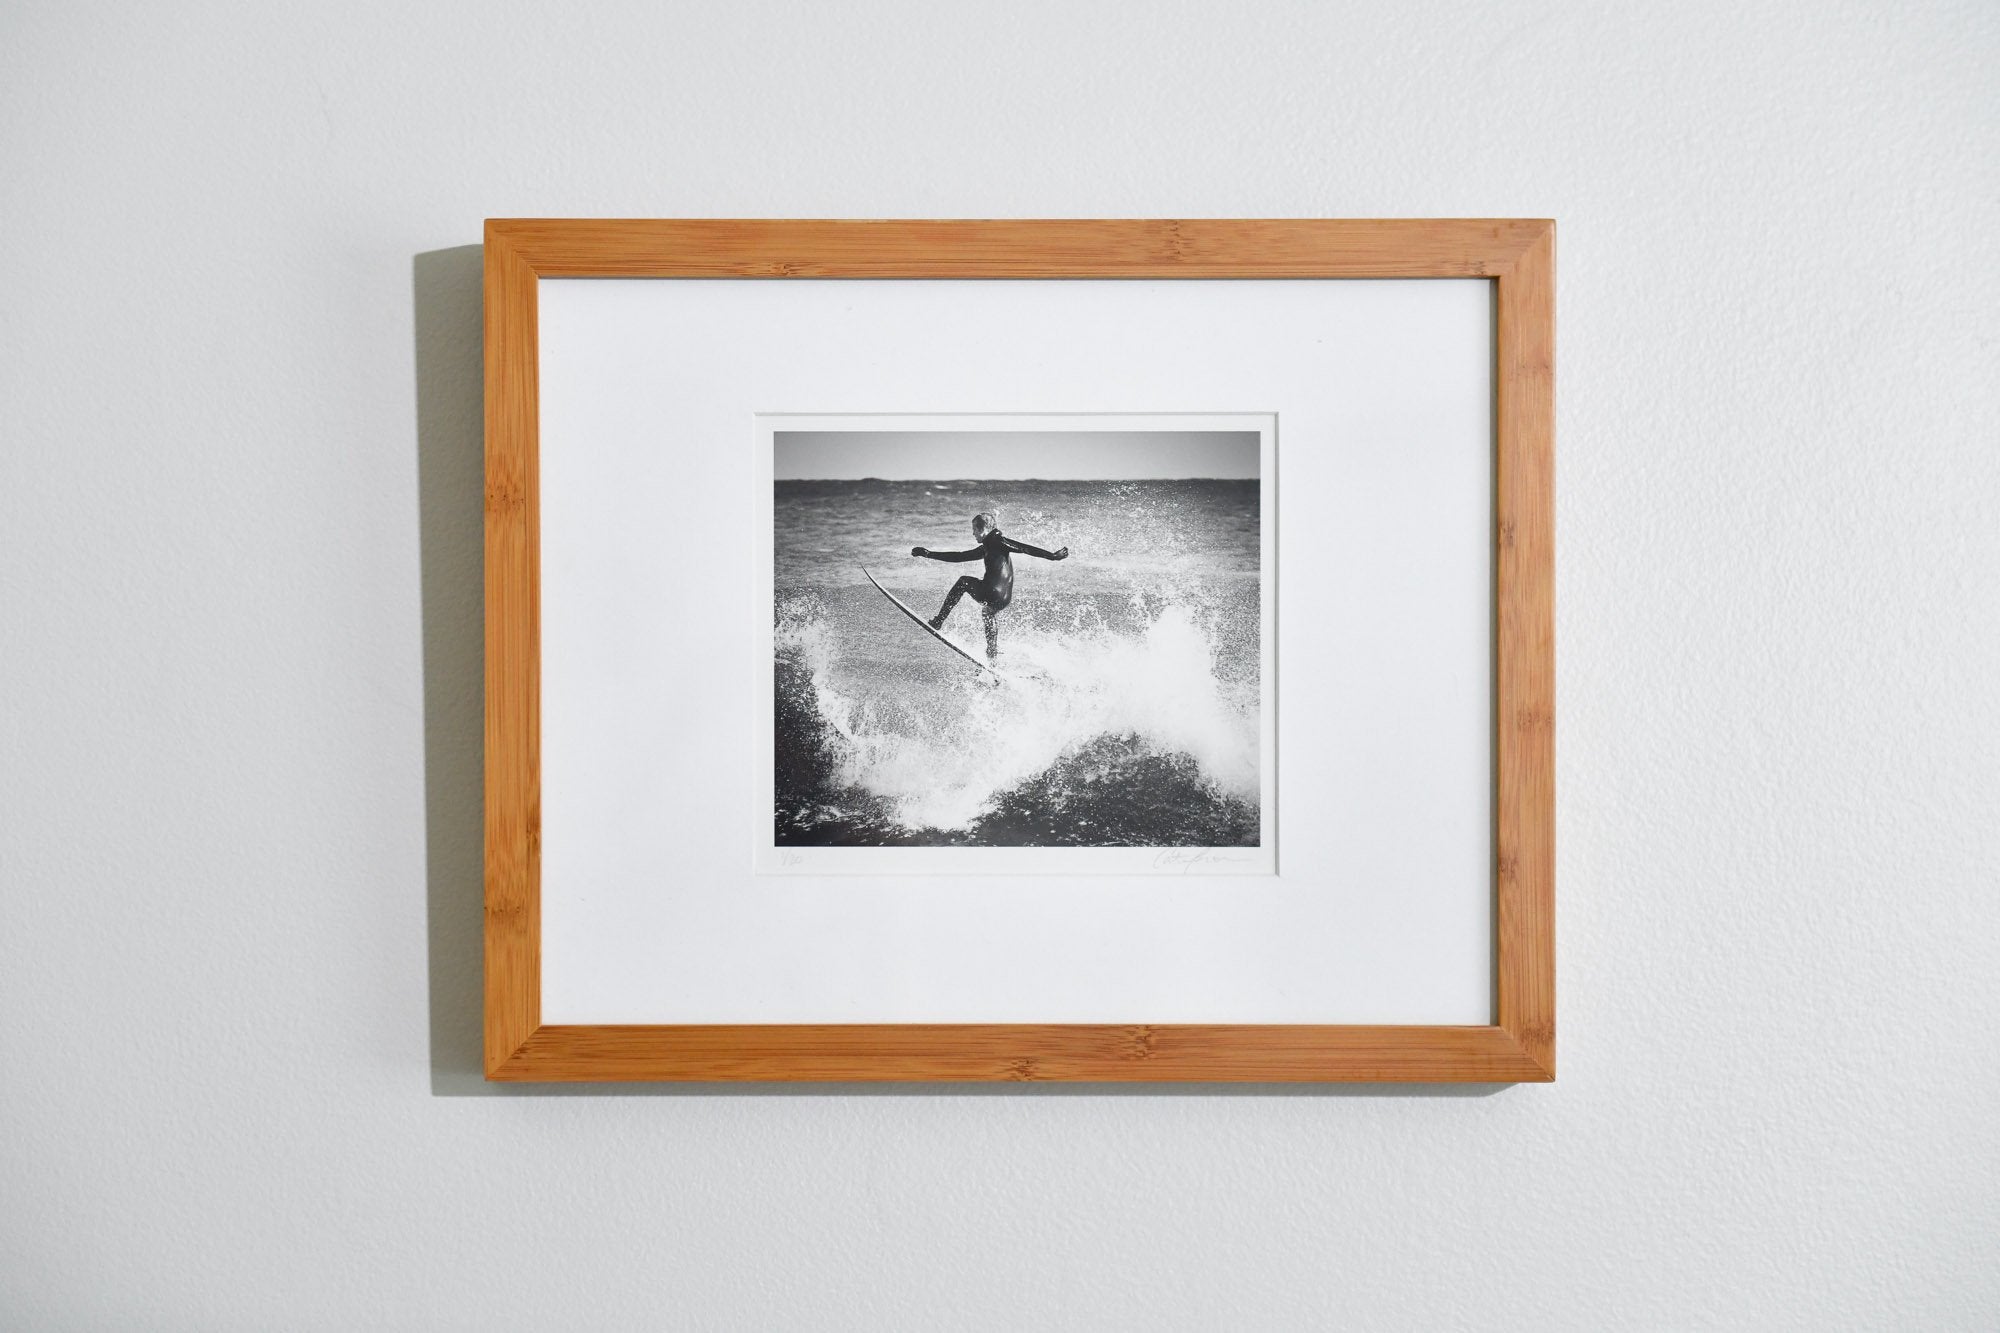 Cate Brown Photo Surfer #2 // Framed Fine Art 11x14" // Limited Edition 1 of 20 Available Inventory Ocean Fine Art